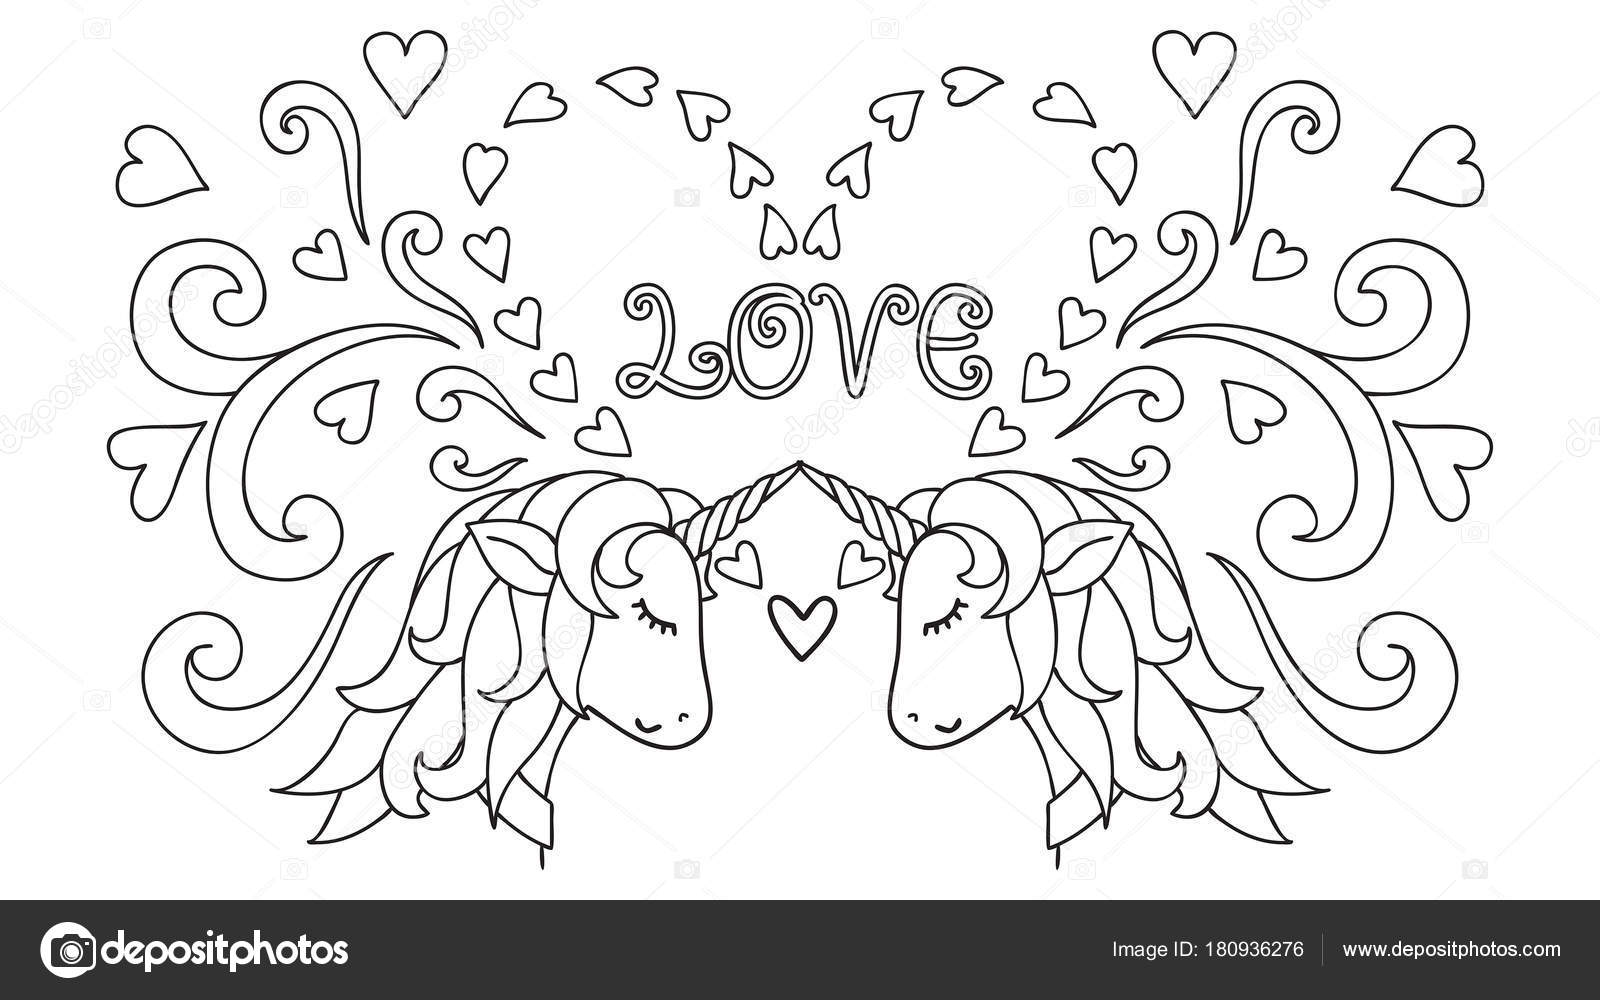 Valentines Day Coloring Pages For Kids Unicorn - Defi Bouger